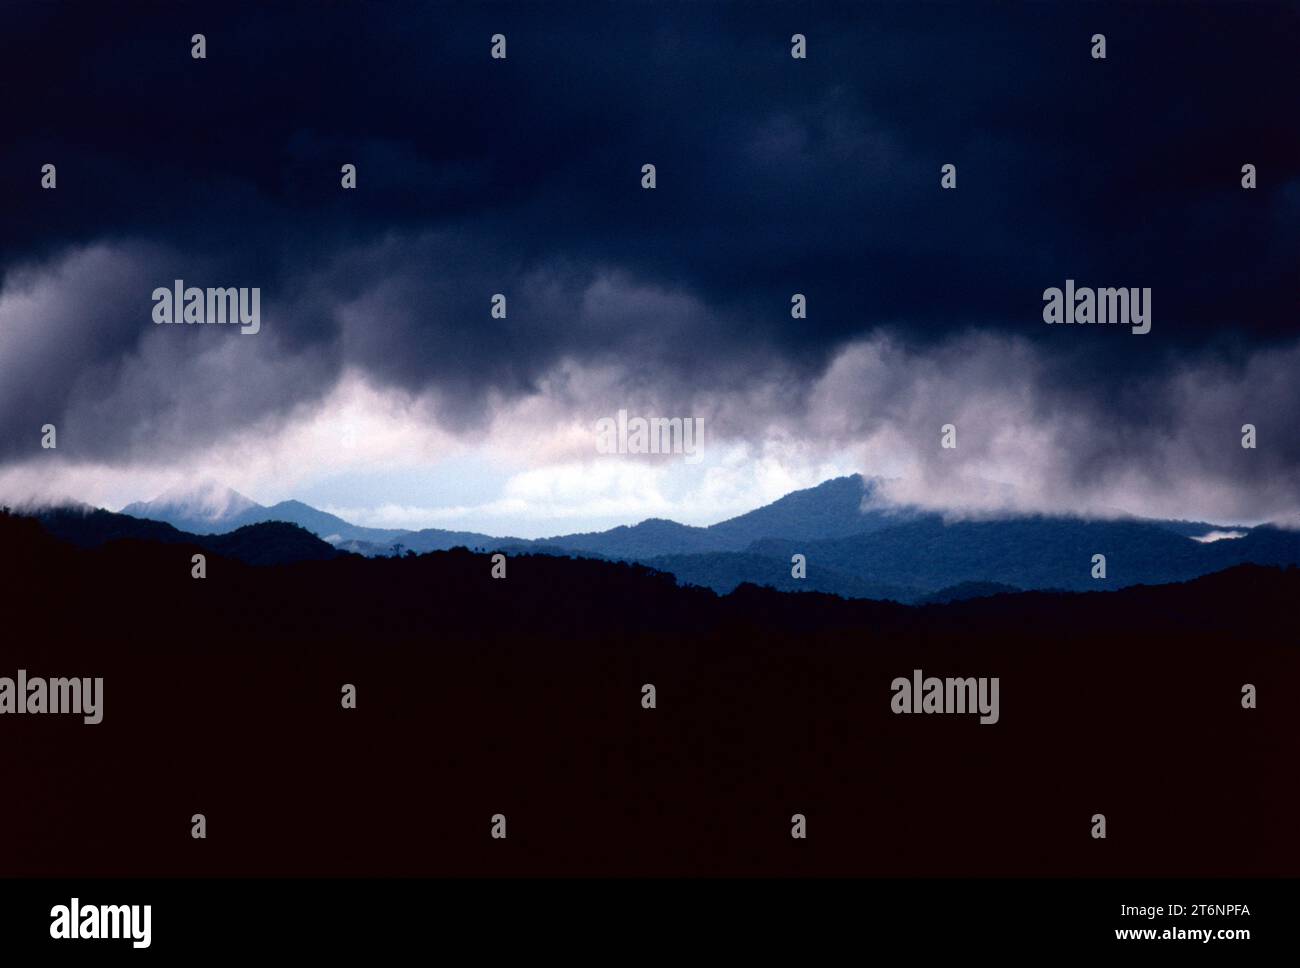 Papua New Guinea. Highlands. View of mountains with dark storm clouds. Stock Photo